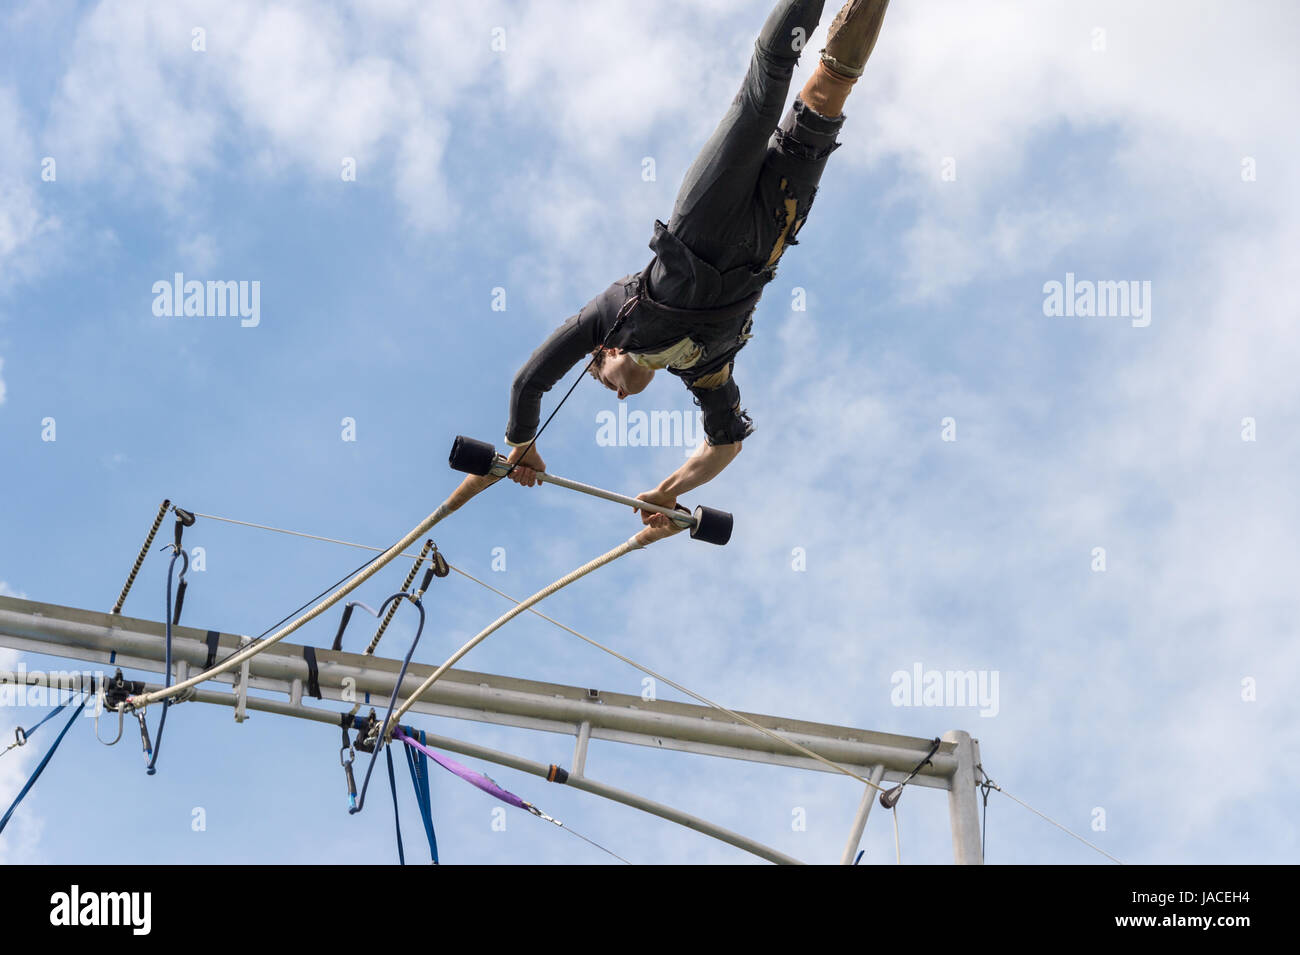 Montreal, Canada - 4 June 2017: Trapeze artist performing outside In Jeanne Mance Park Stock Photo